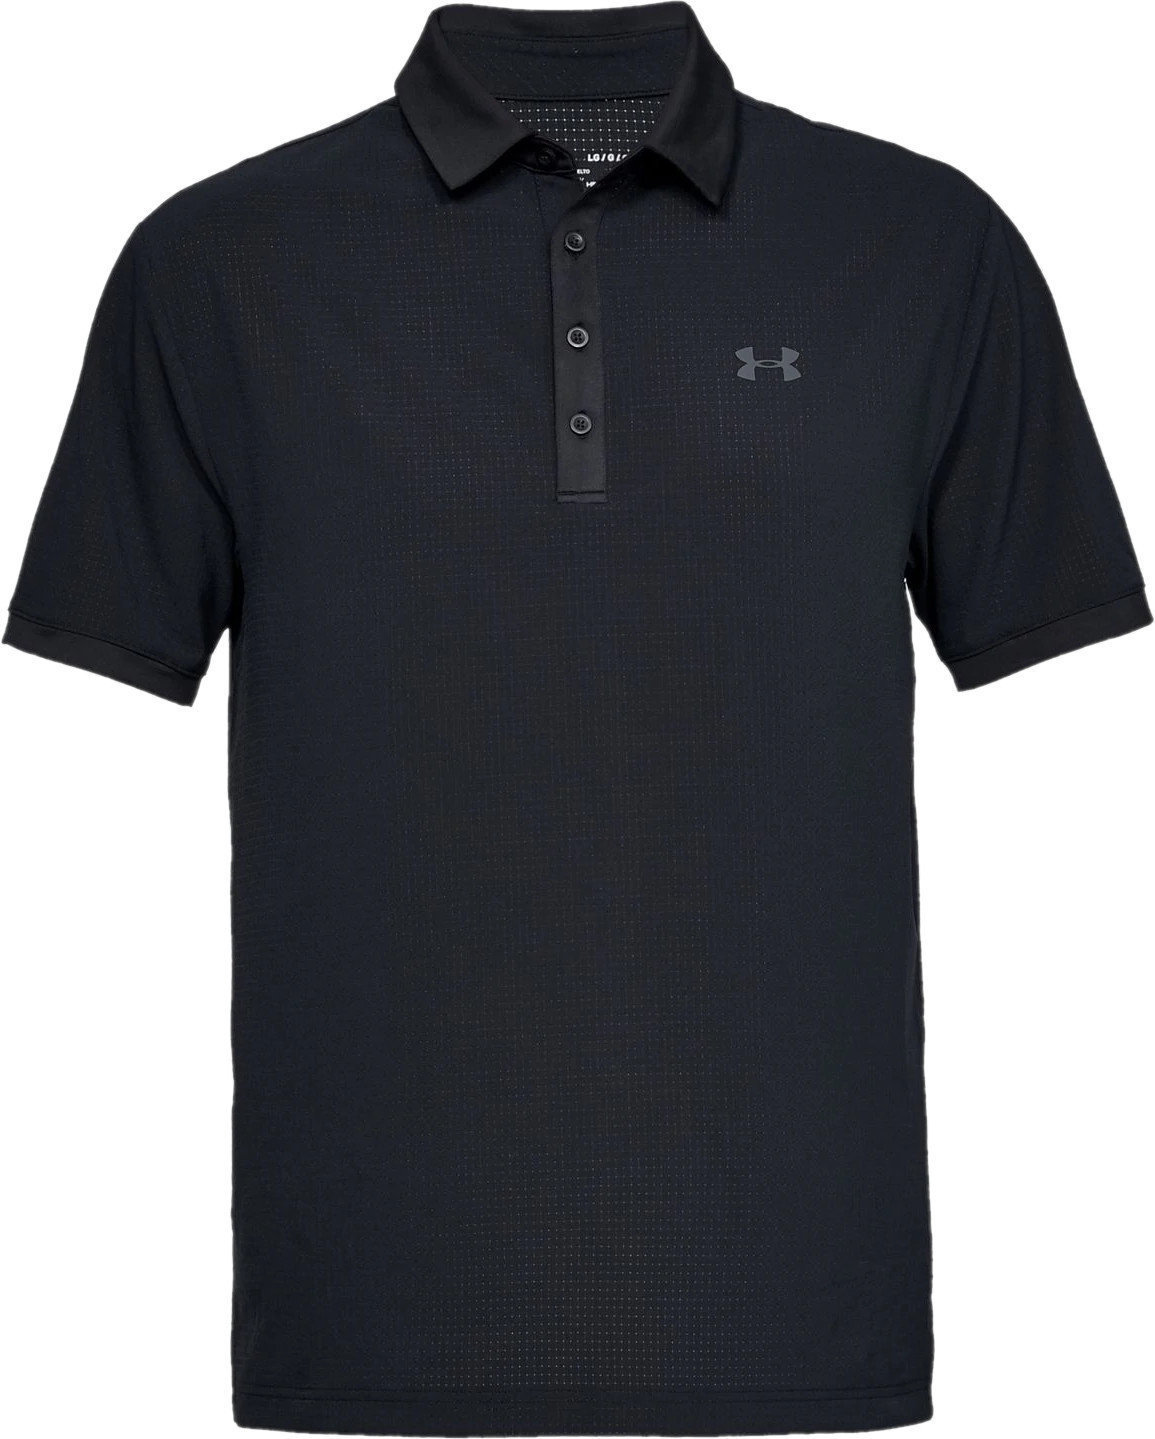 Polo trøje Under Armour Playoff Vented Sort L